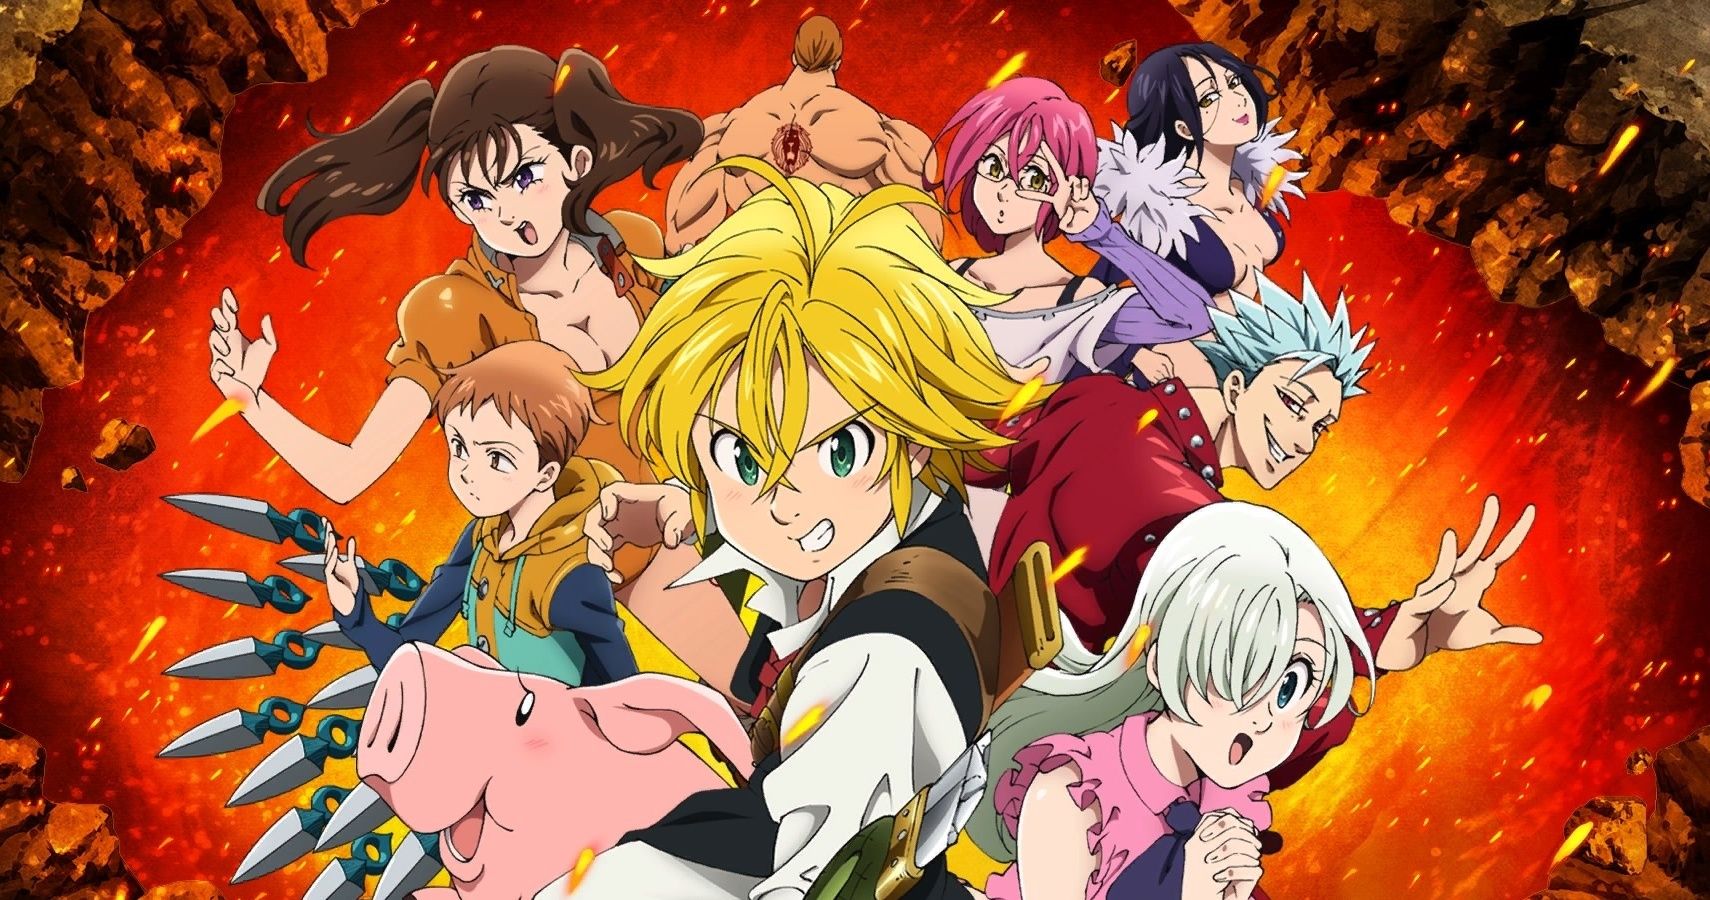 The 10 Best Episodes Of Seven deadly sins (According To IMDb)